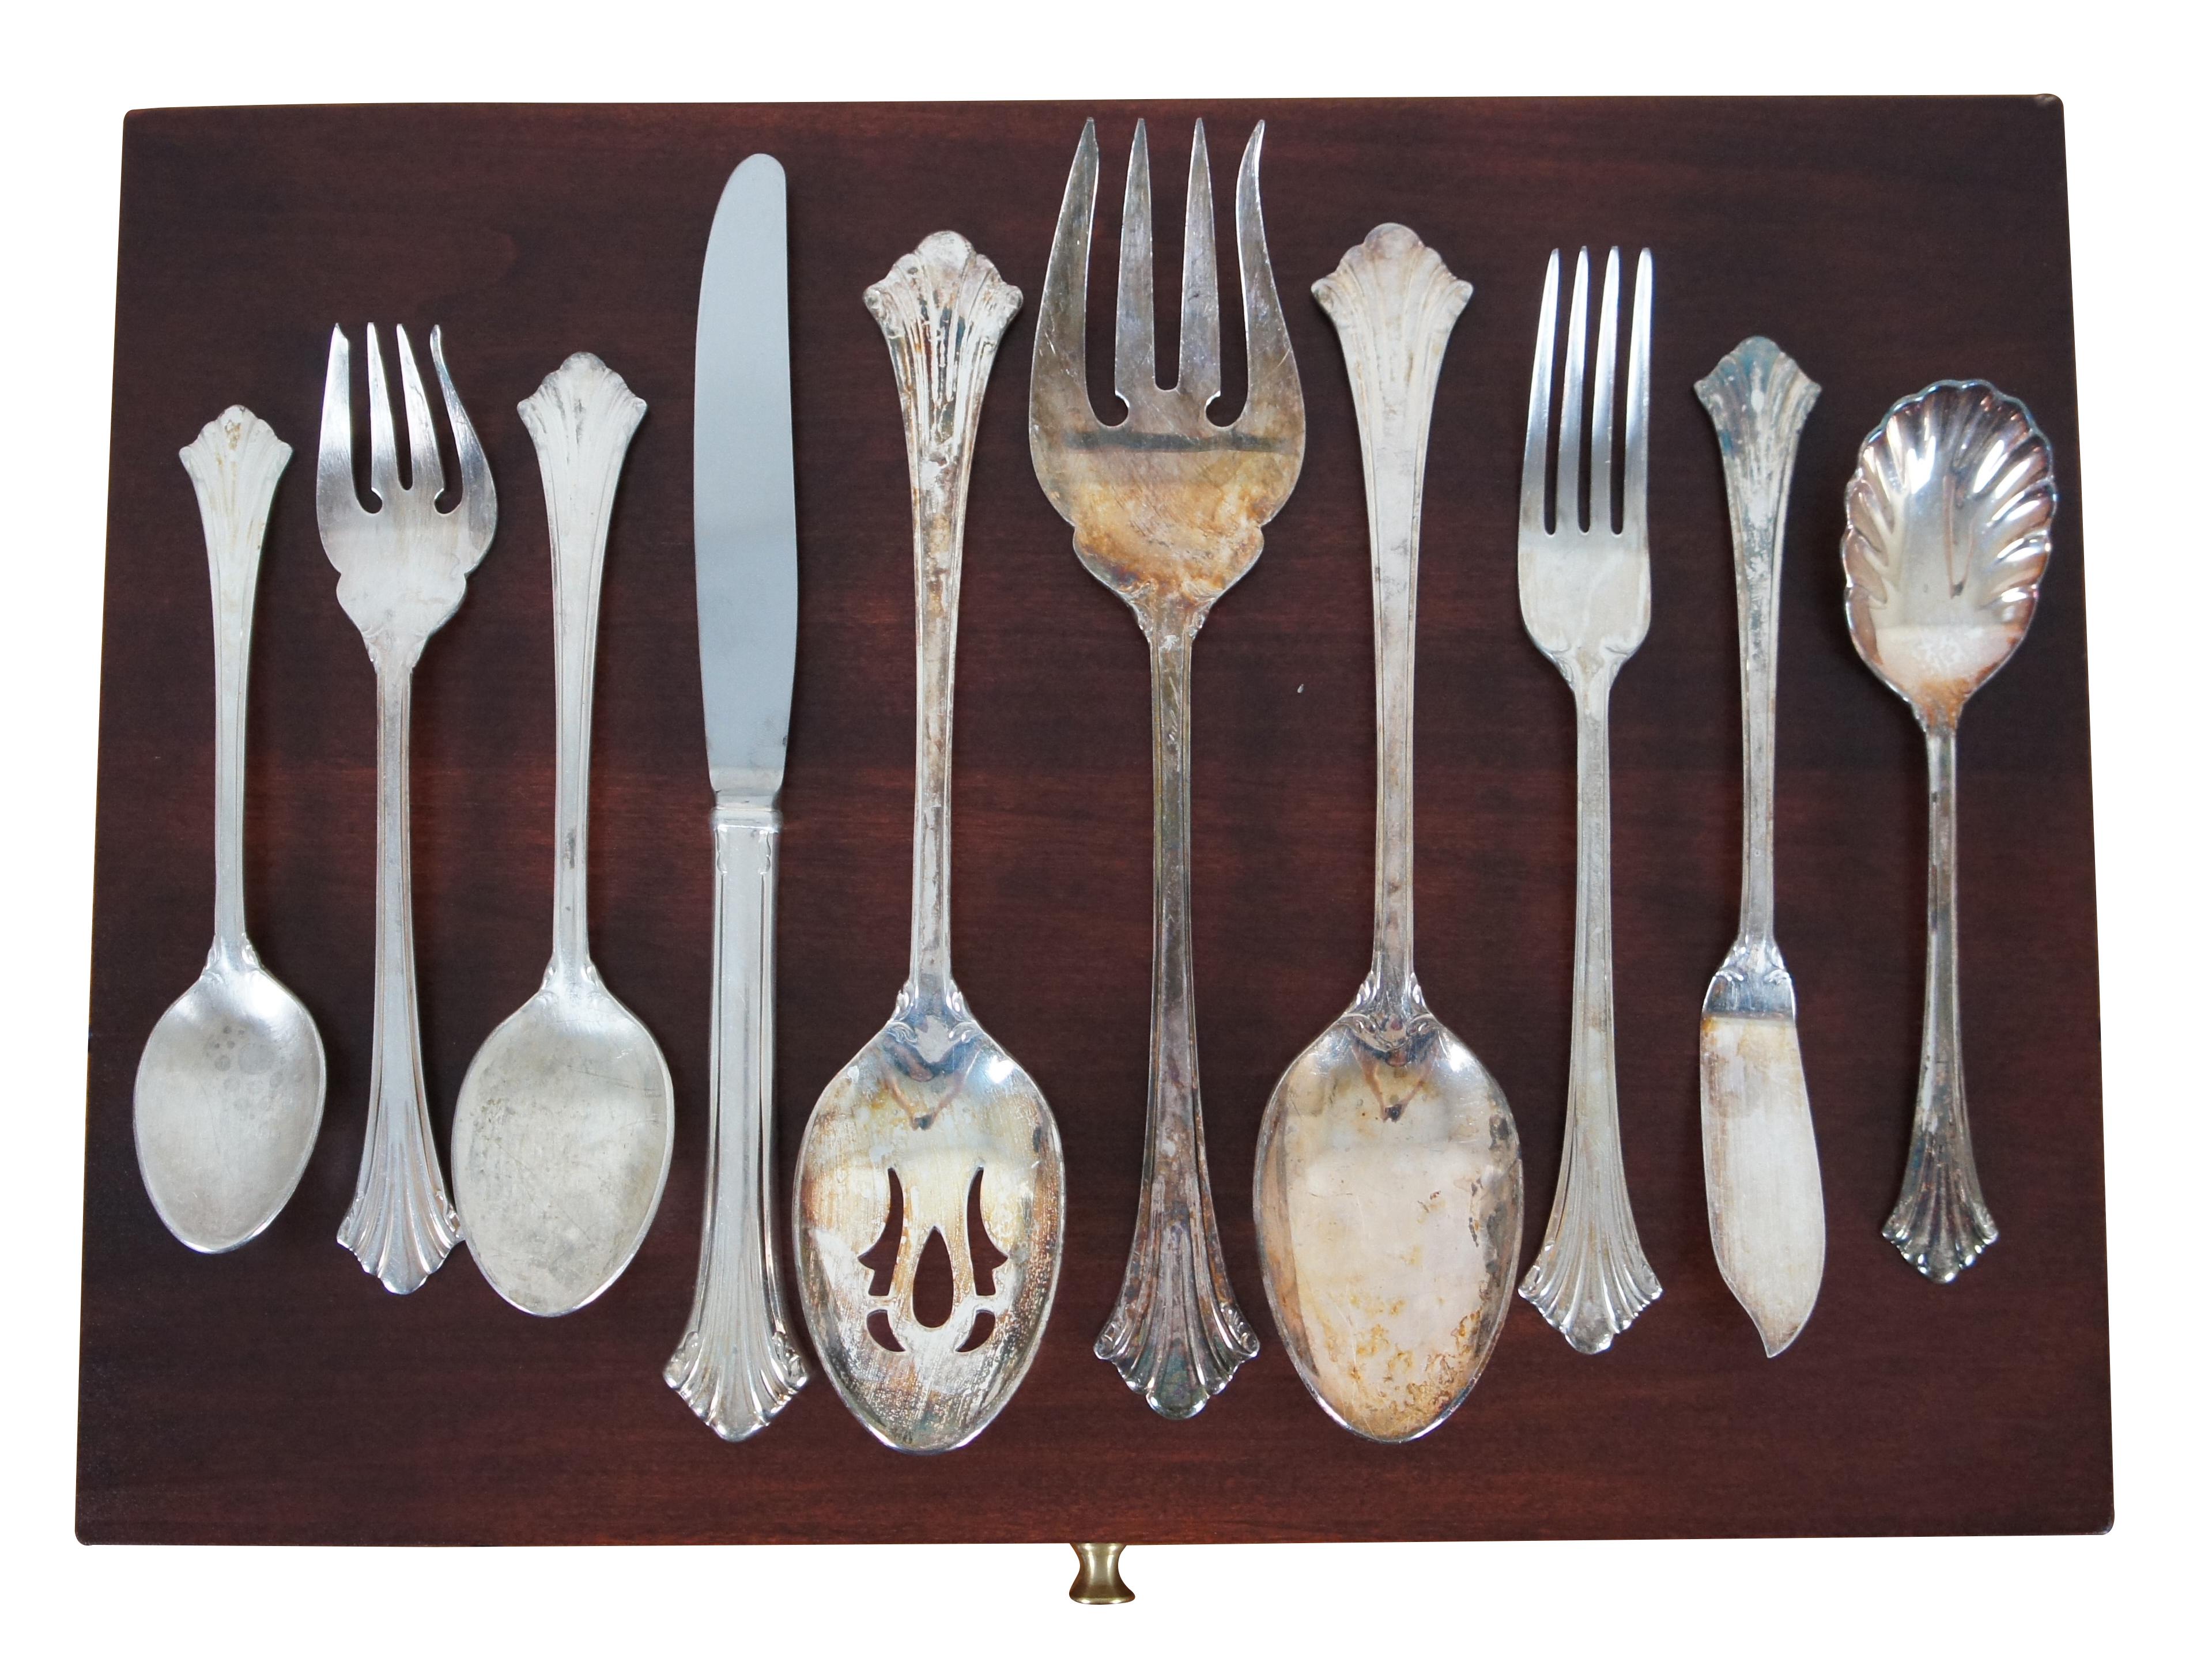 Vintage sixty five piece set of Reed and Barton silver plate flatware in the Highlands pattern (introduced in 1994) including service for 12, several serving utensils, and storage box.

